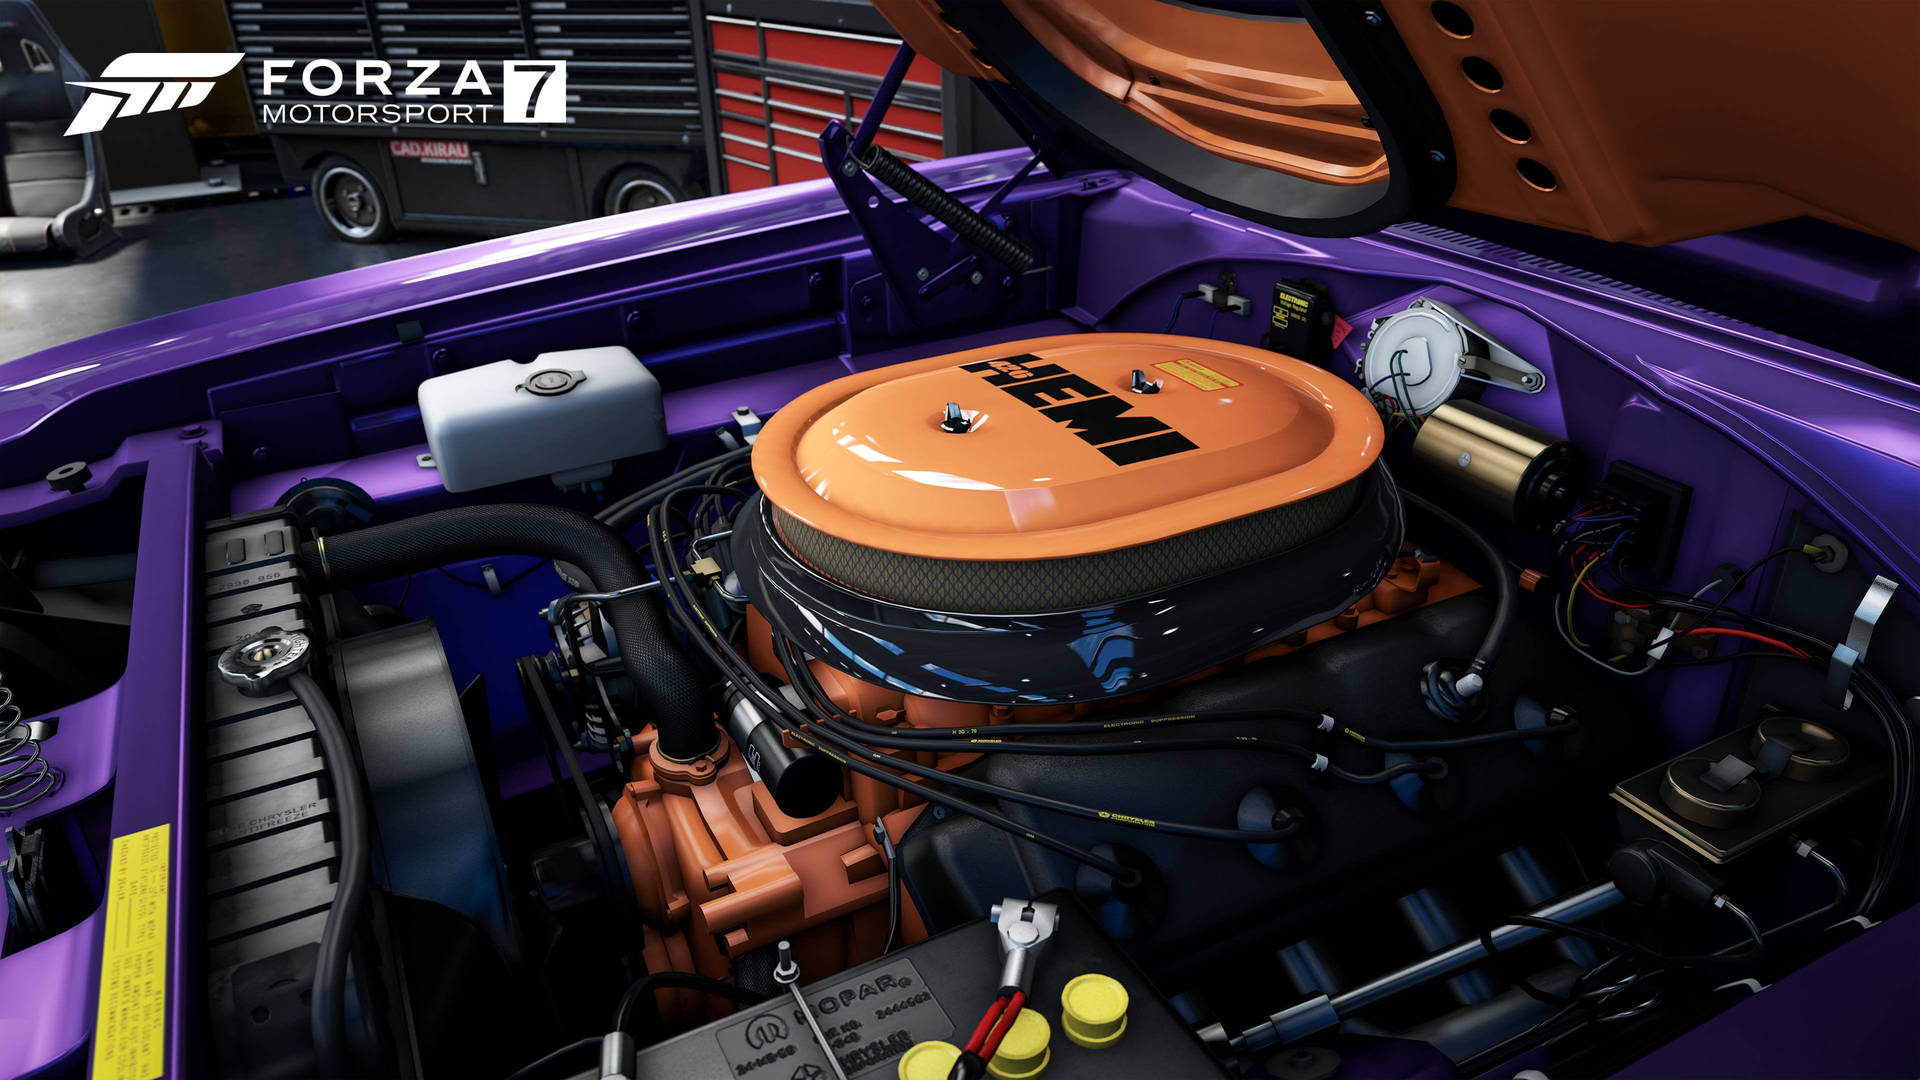 Forzamotorsport 7 Dodge Engine Would Be Translated To German As 